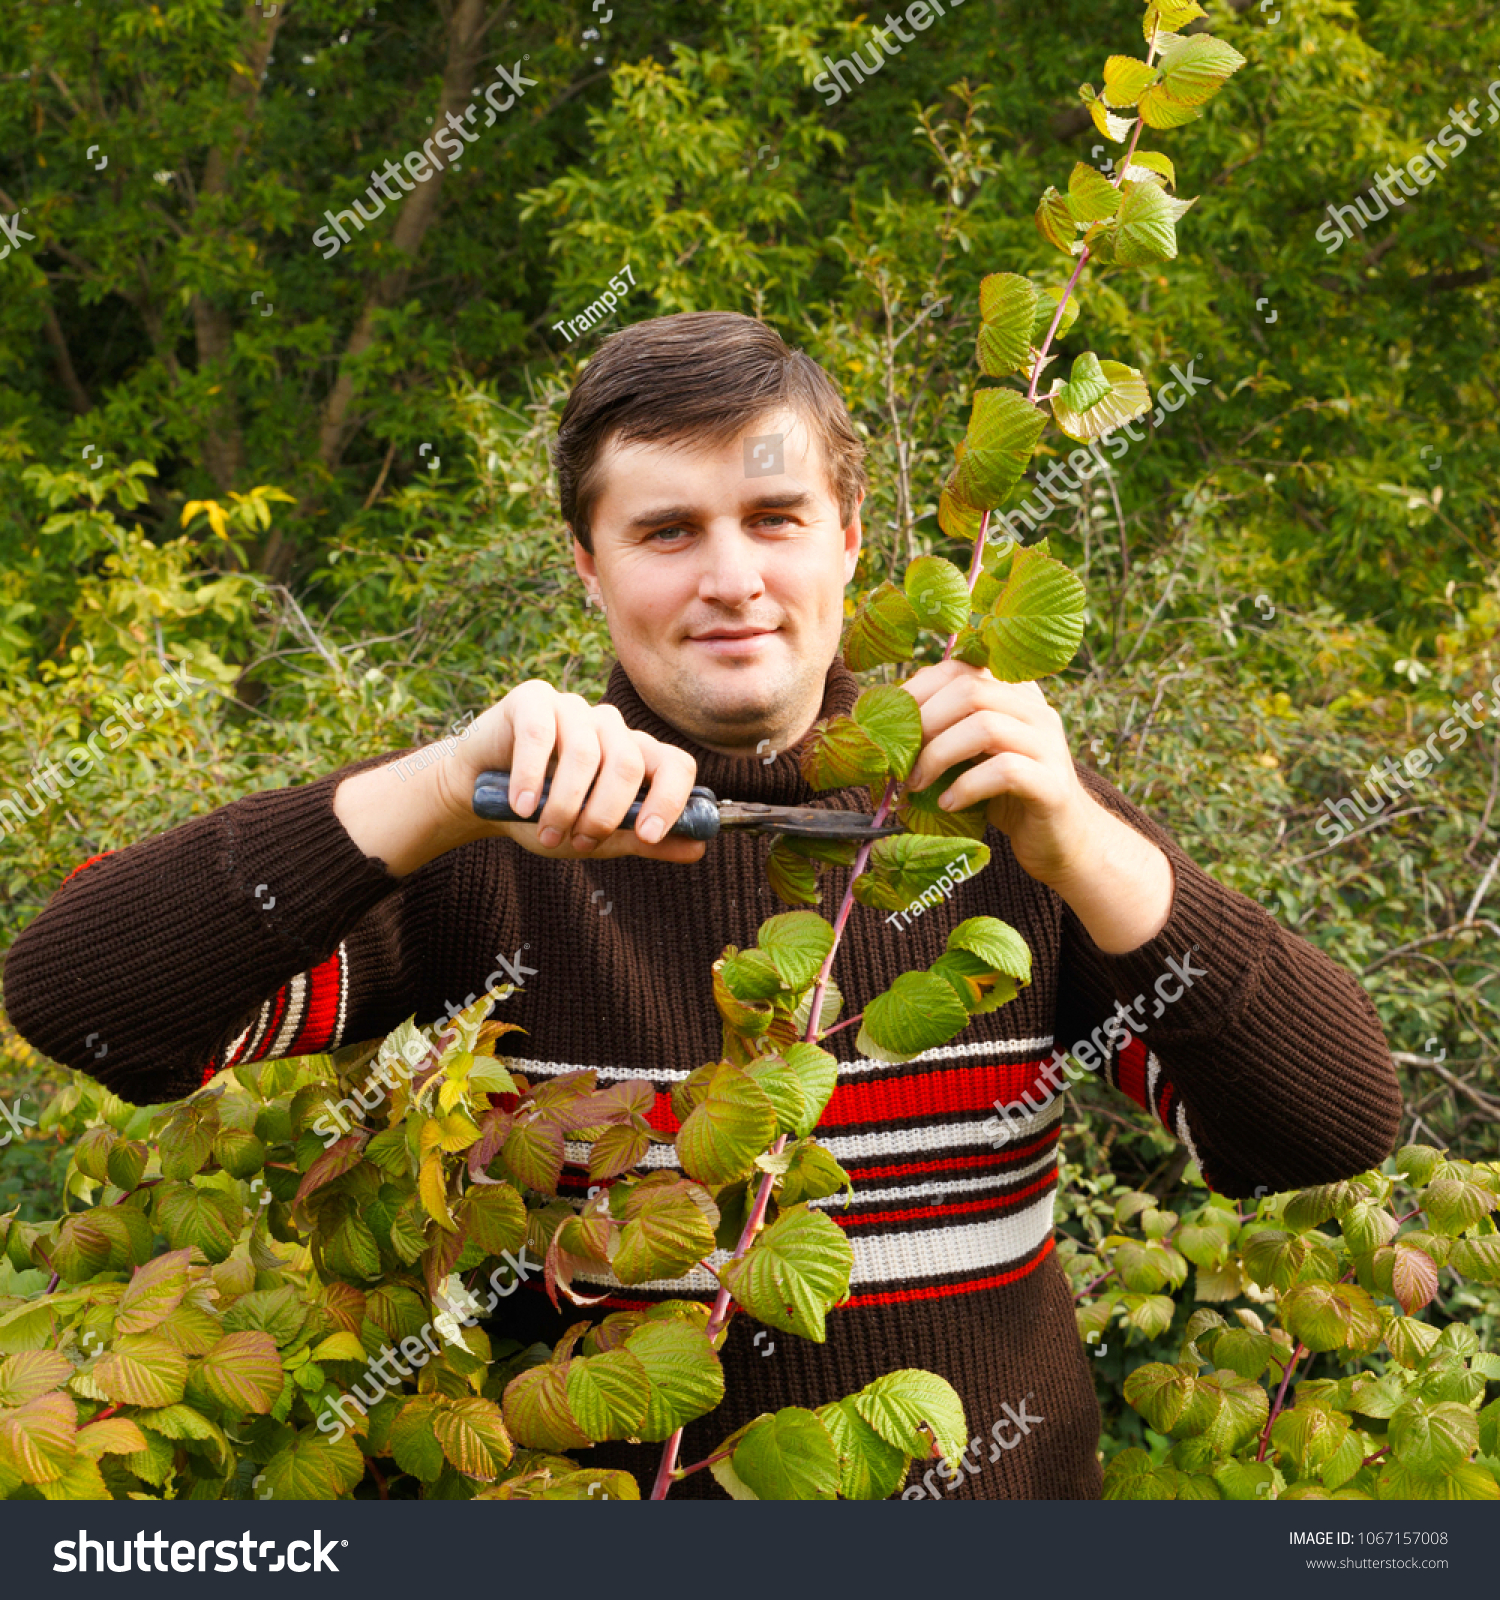 A young man makes an autumn pruning of raspberries. #1067157008